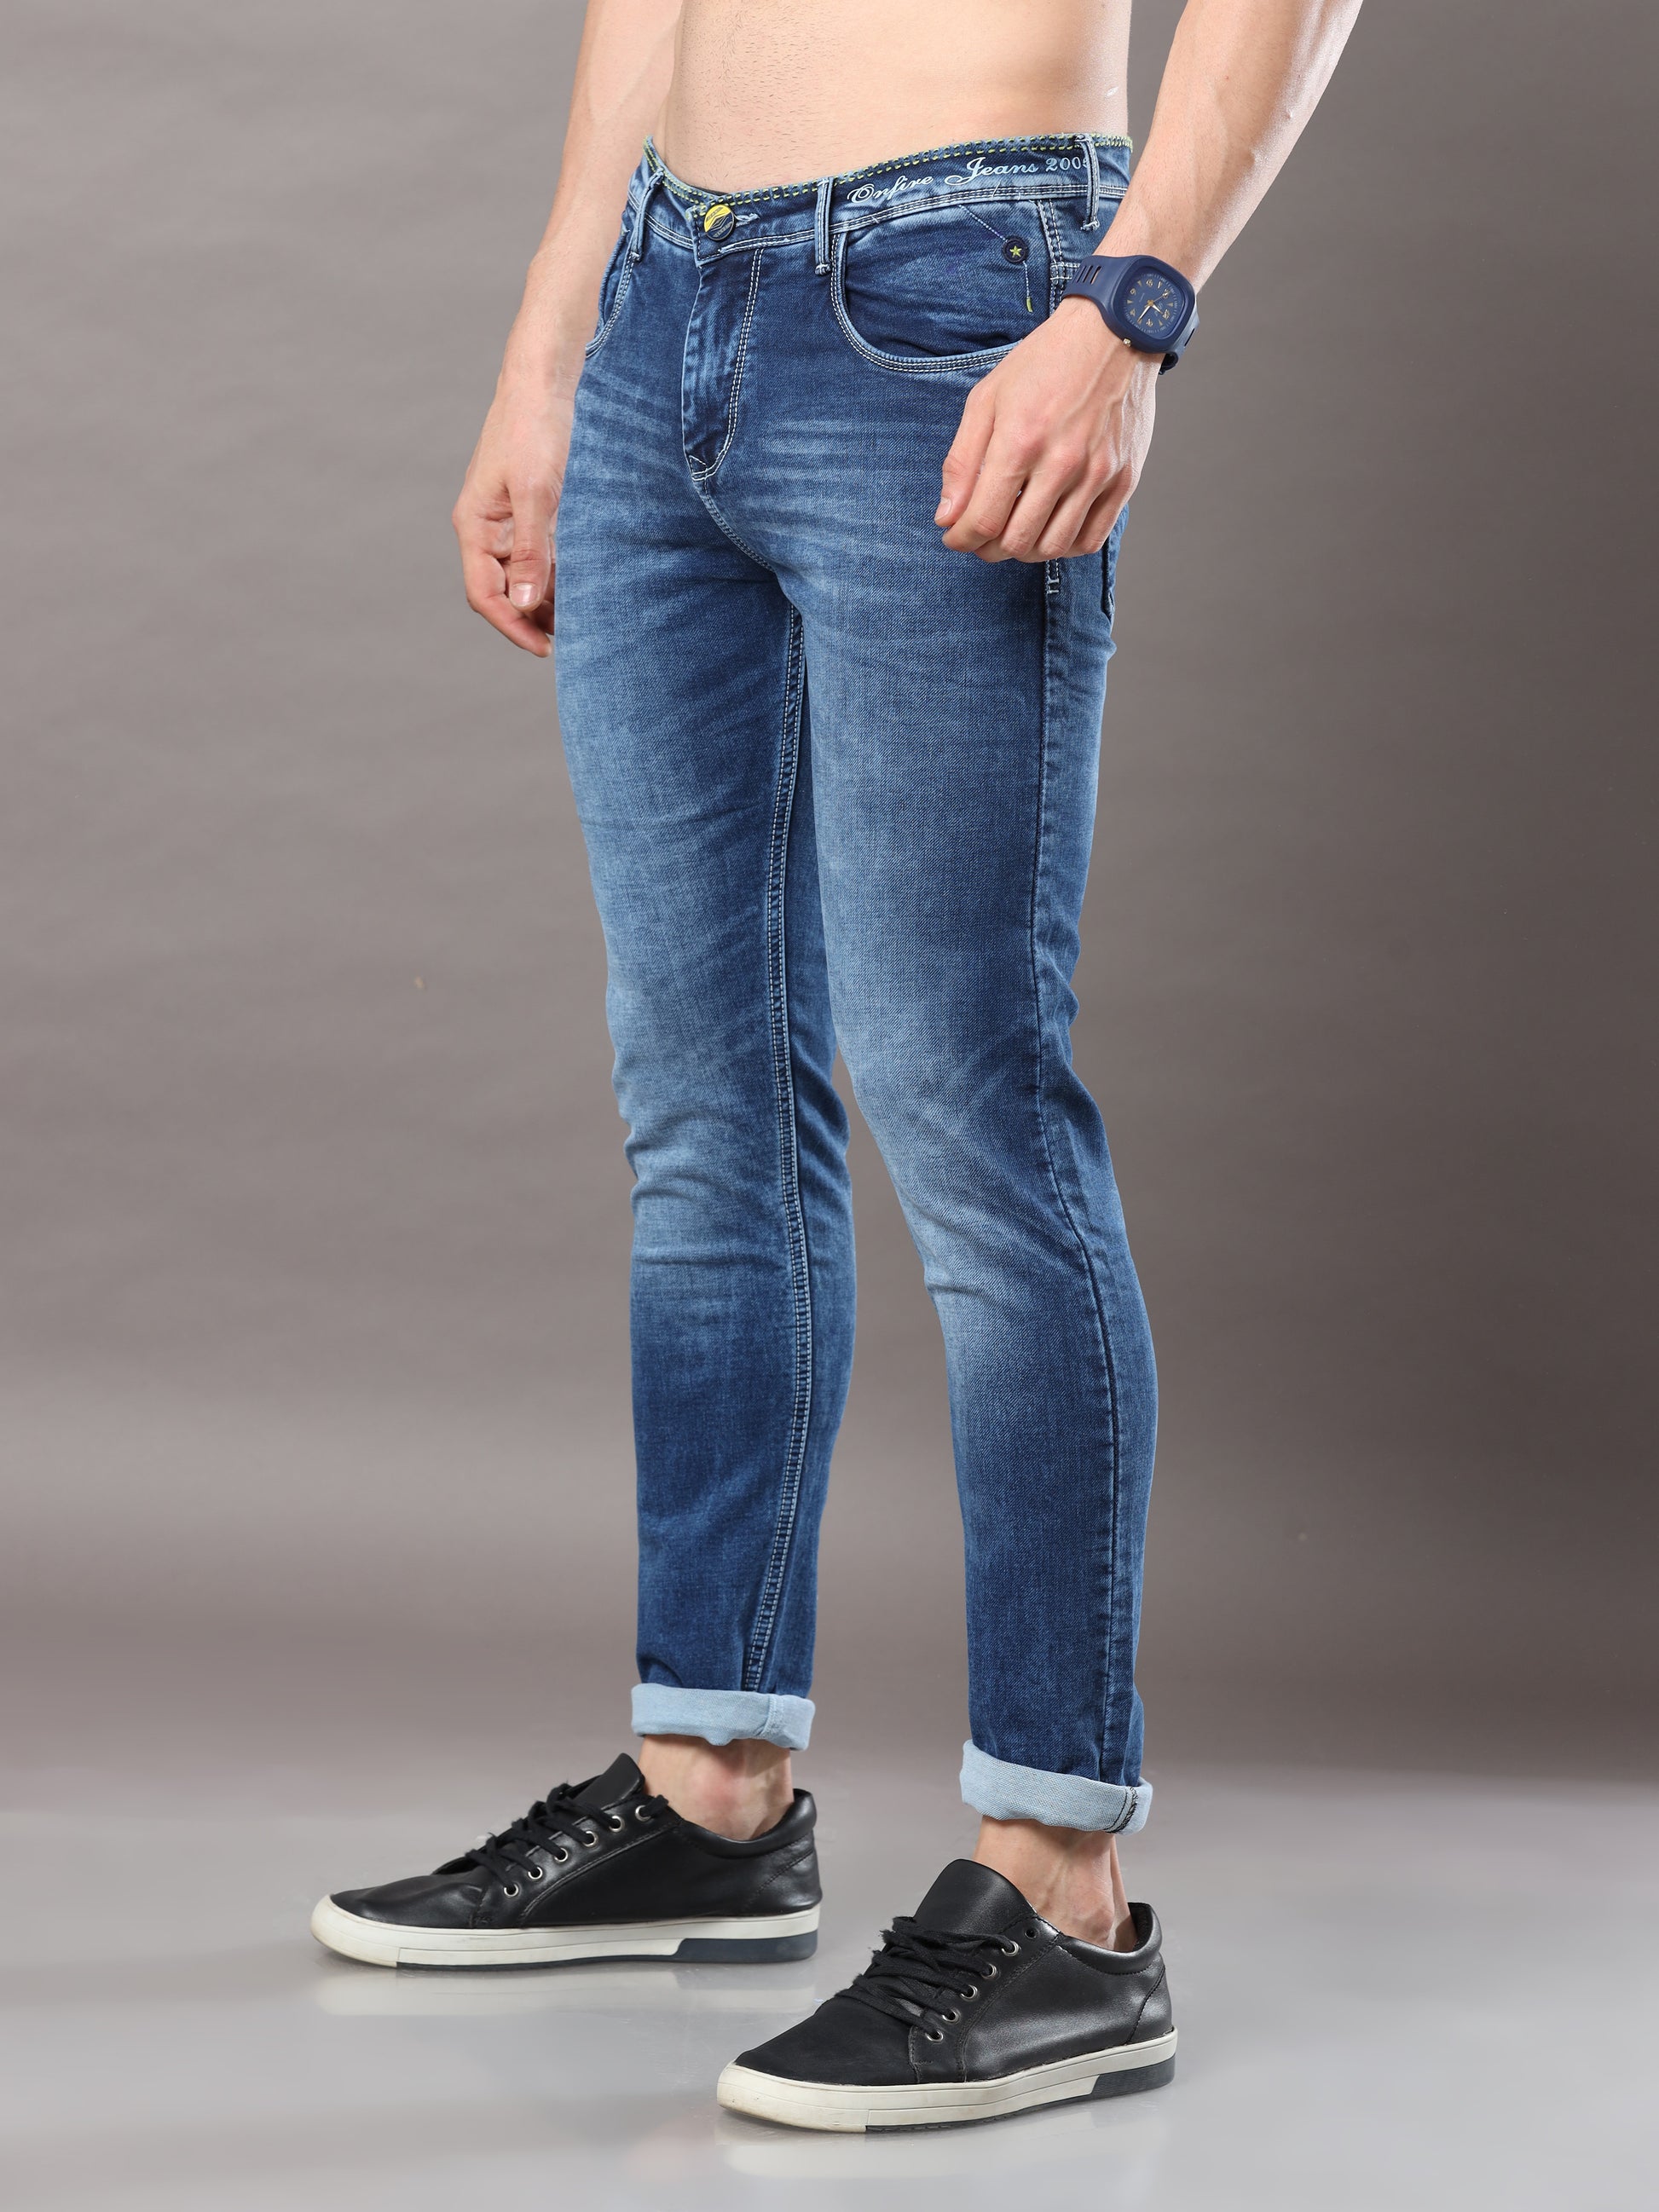 Onfire Admiral Light Blue Skinny Jeans - A1616A